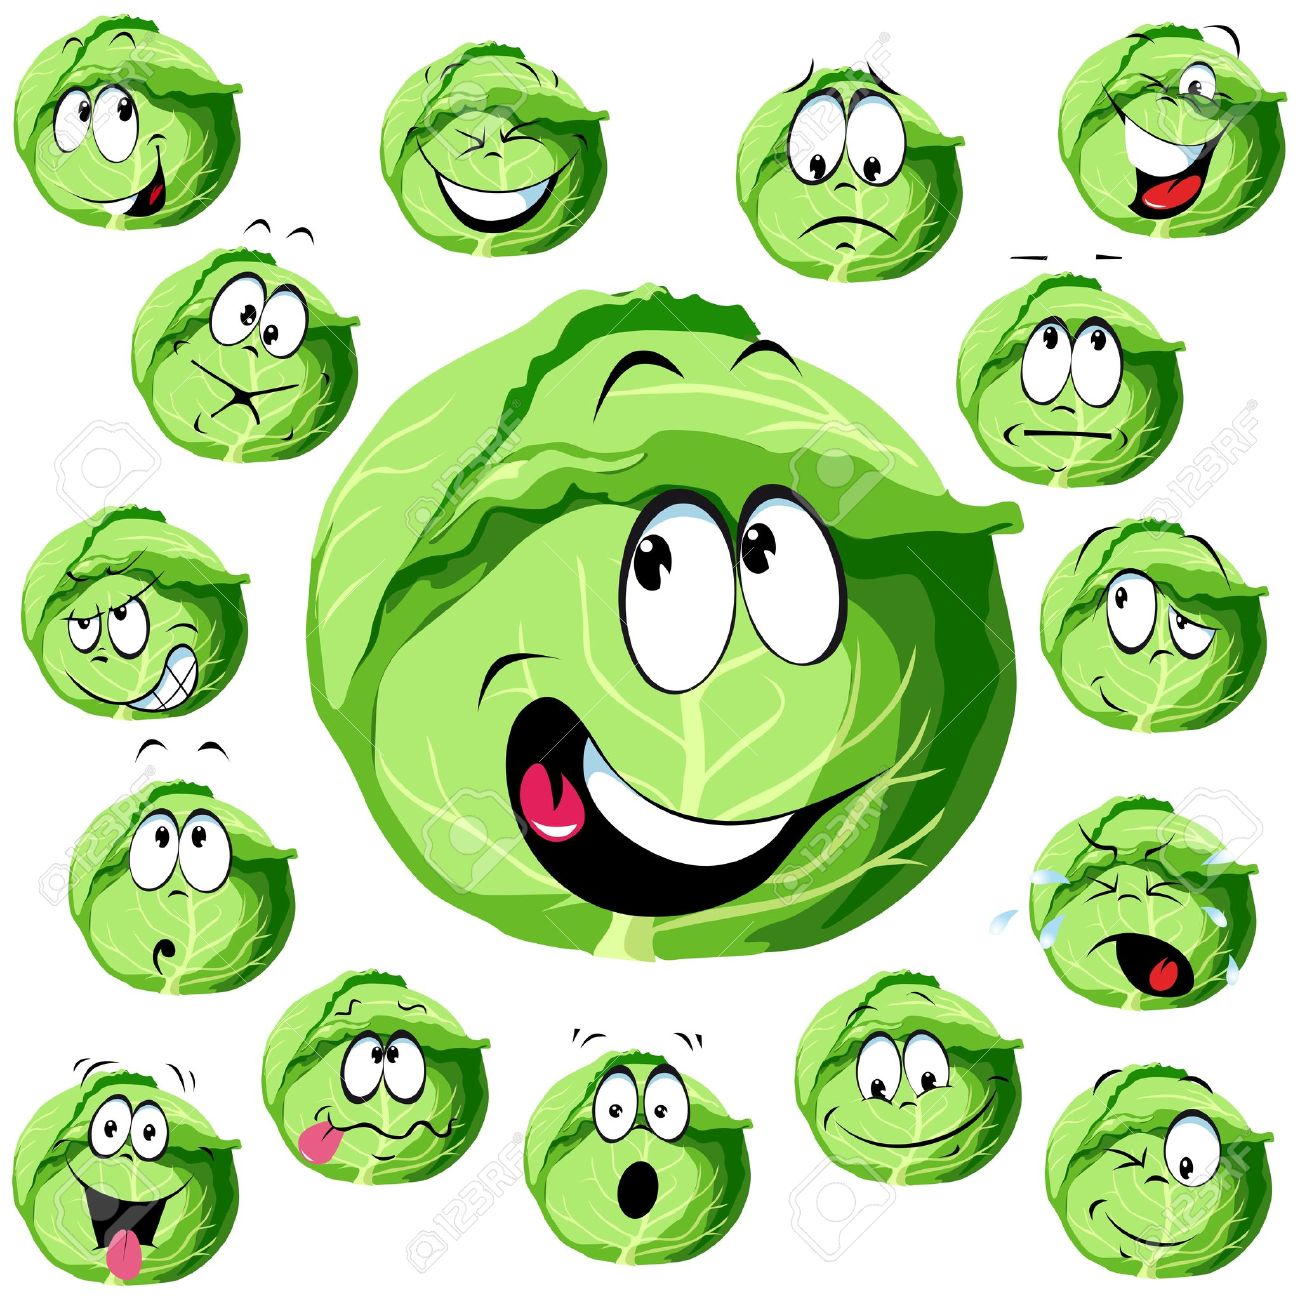 Cabbage clipart happy. Animated cartoon pencil and